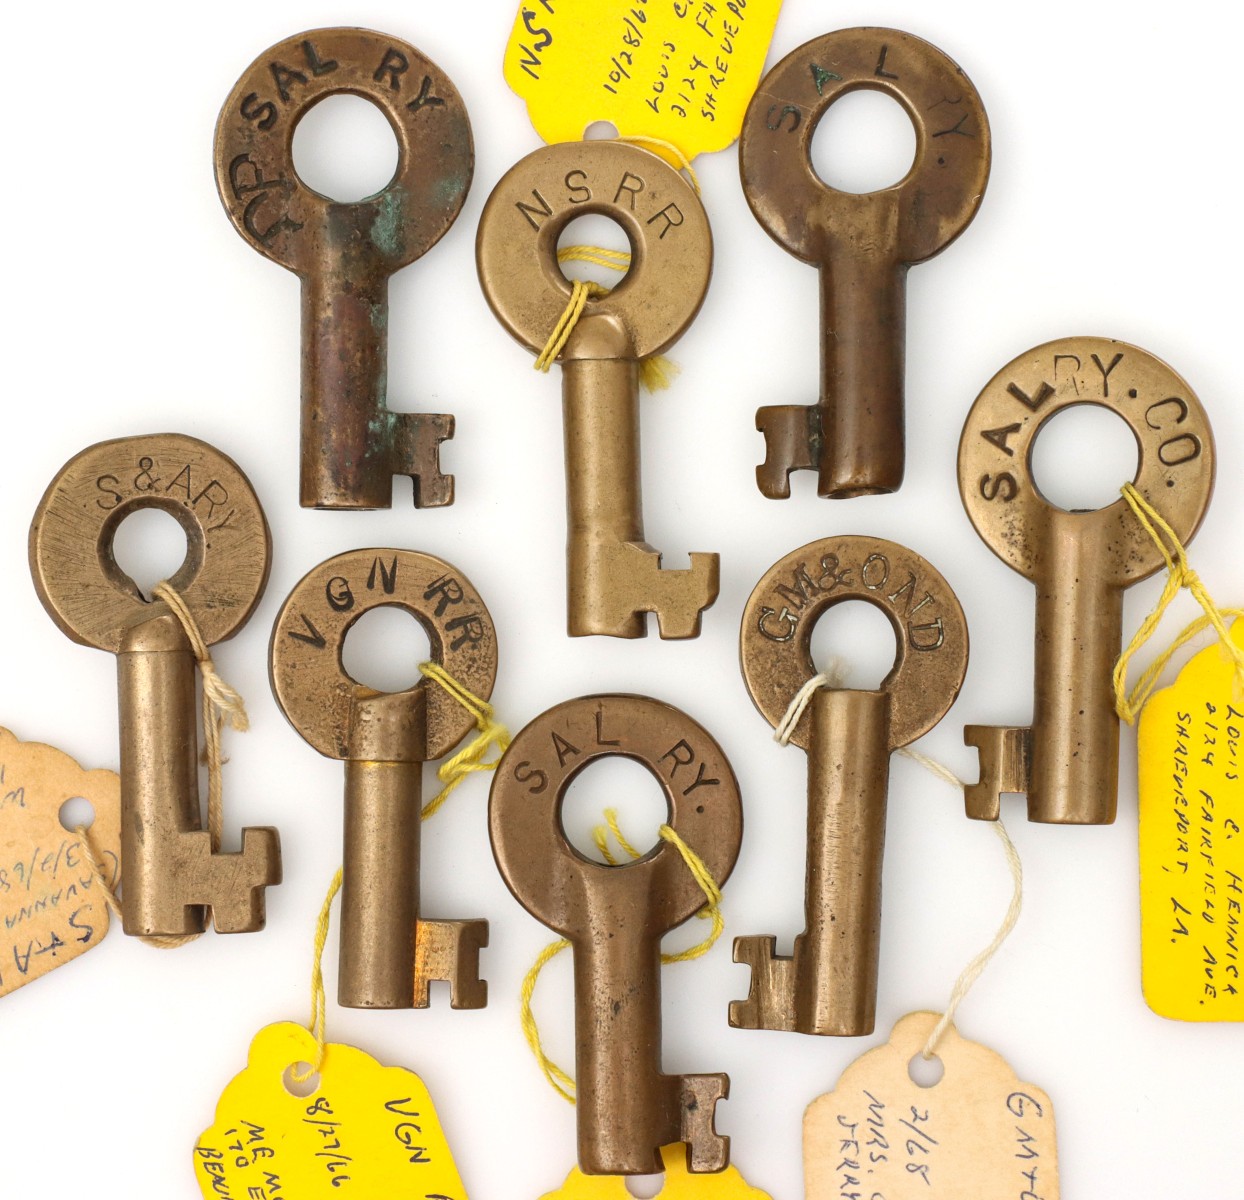 A COLLECTION OF SWITCH KEYS FOR SOUTHERN U.S. RAILROADS